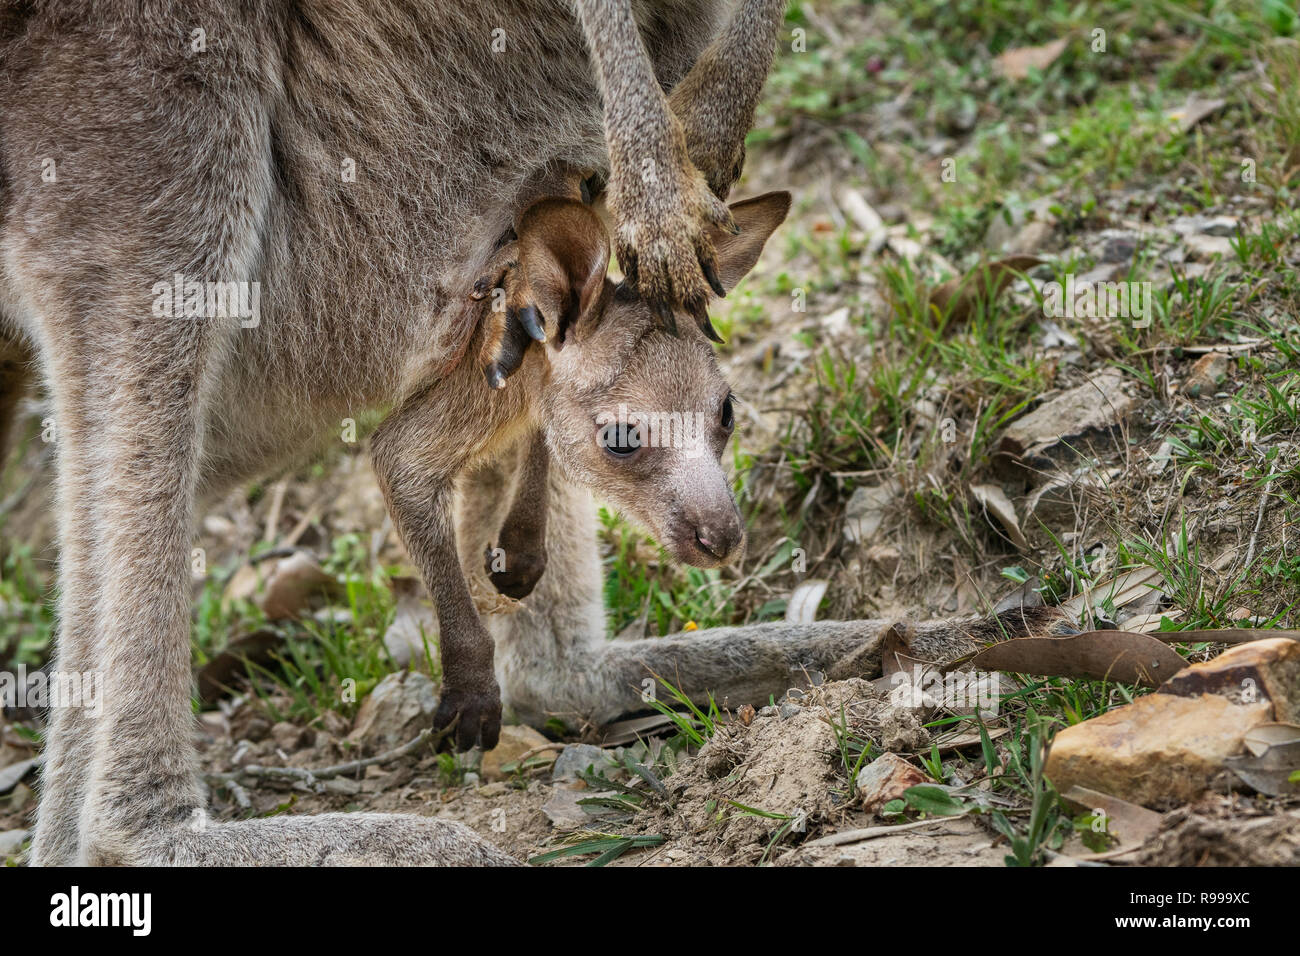 Joey of an Eastern Grey Kangaroo looking out of the pouch. Stock Photo